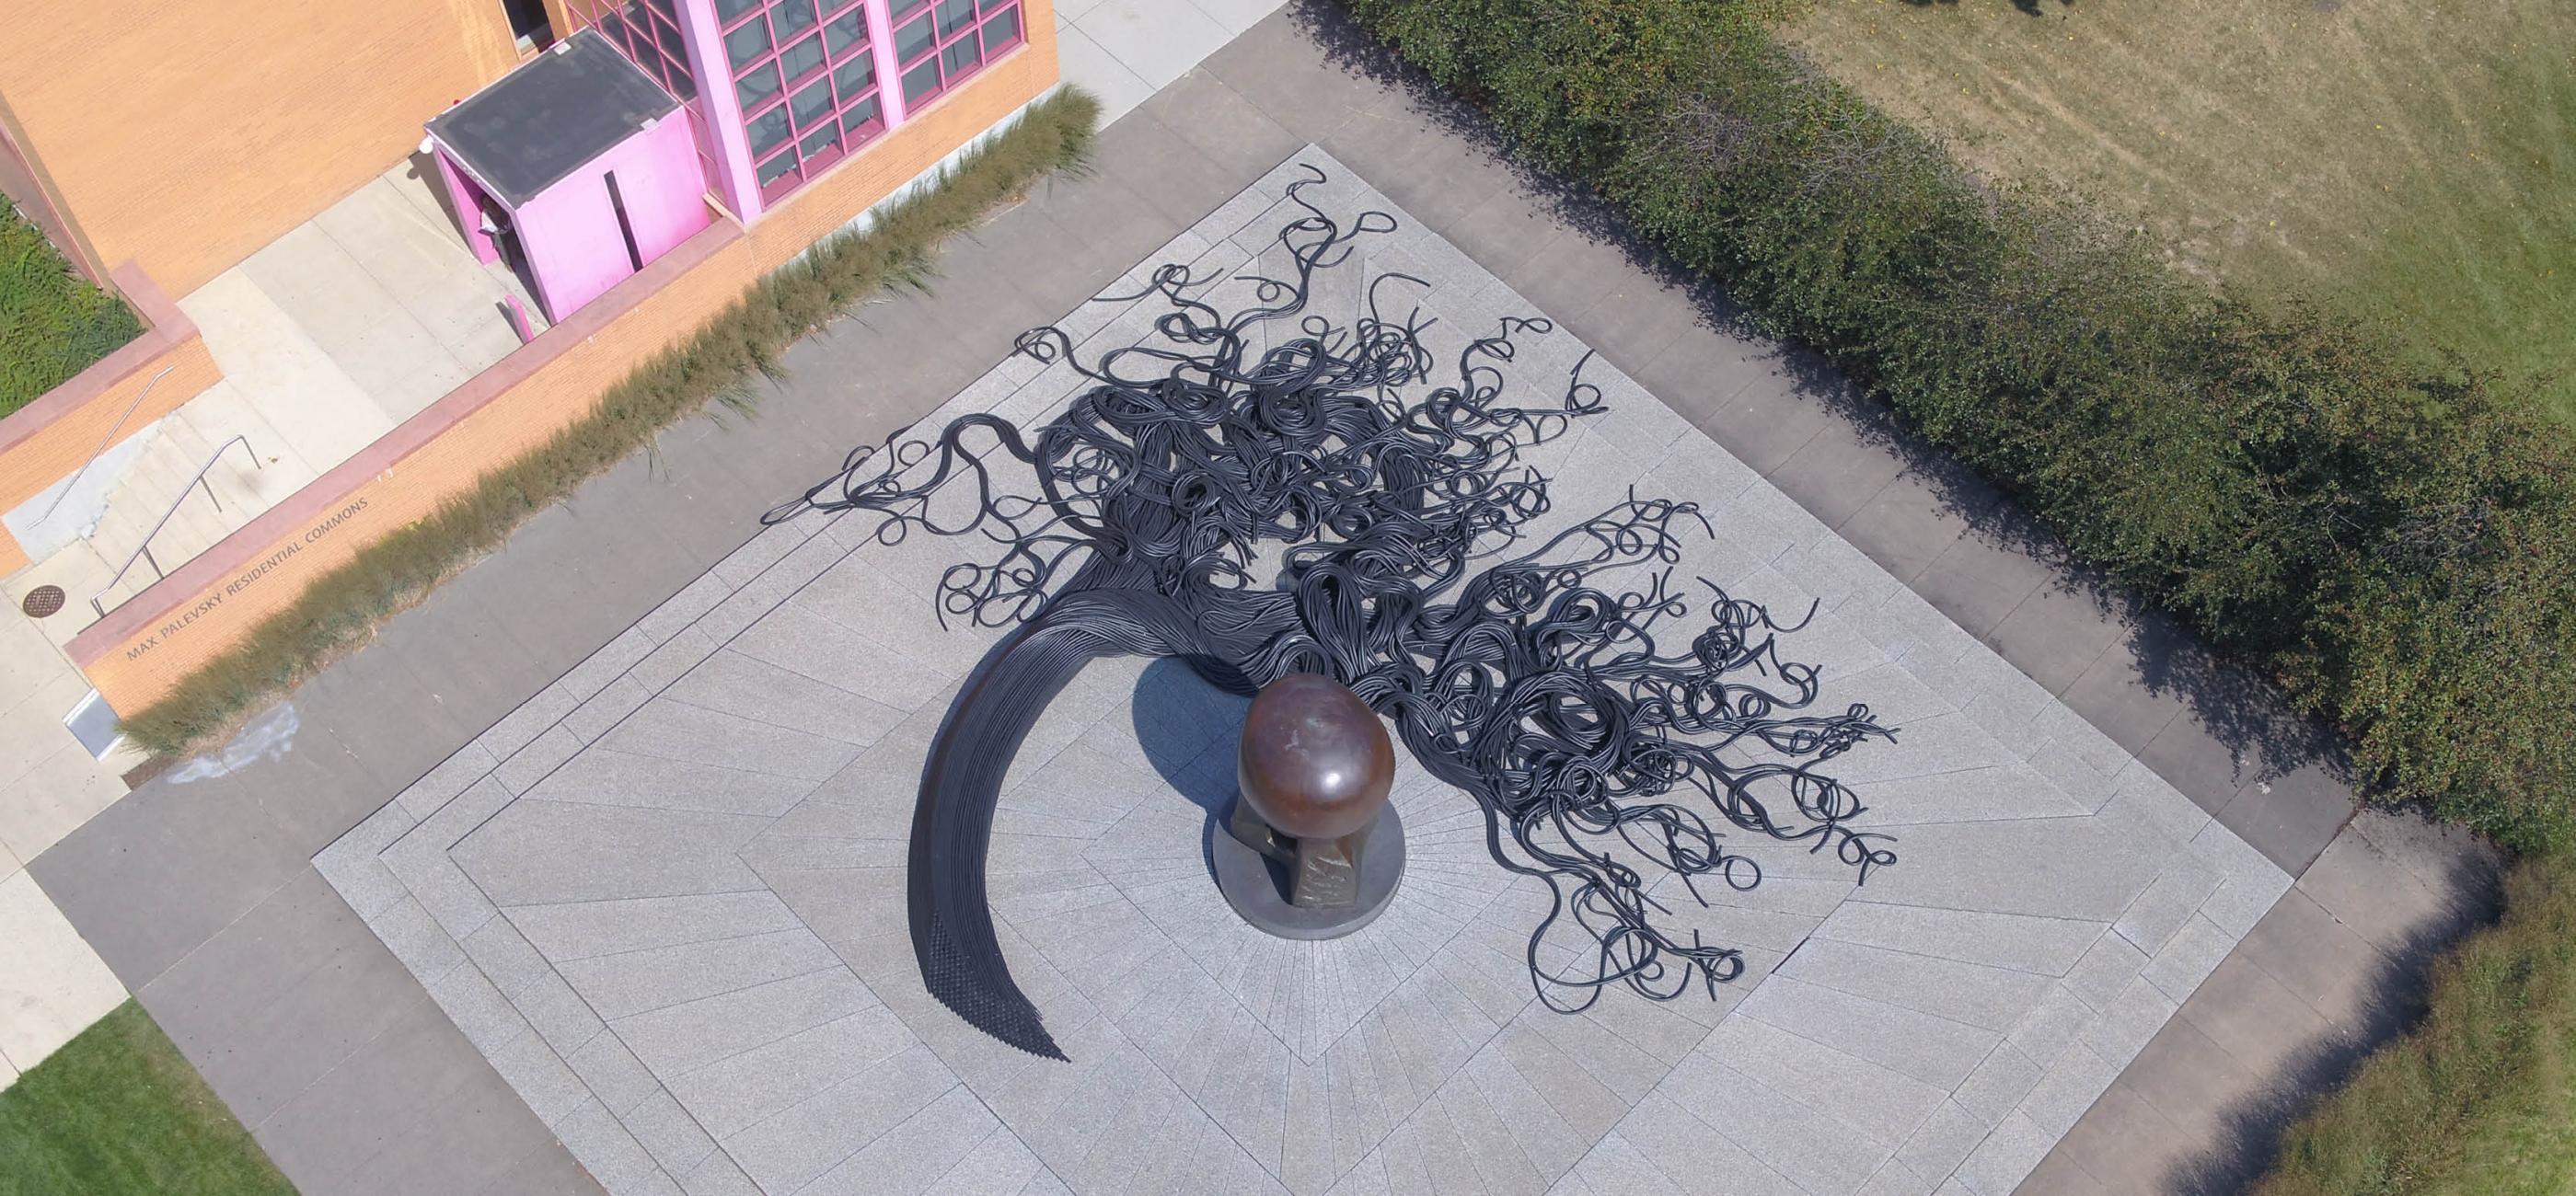 "Nuclear Energy" surrounded by the installation "Nuclear Thresholds"